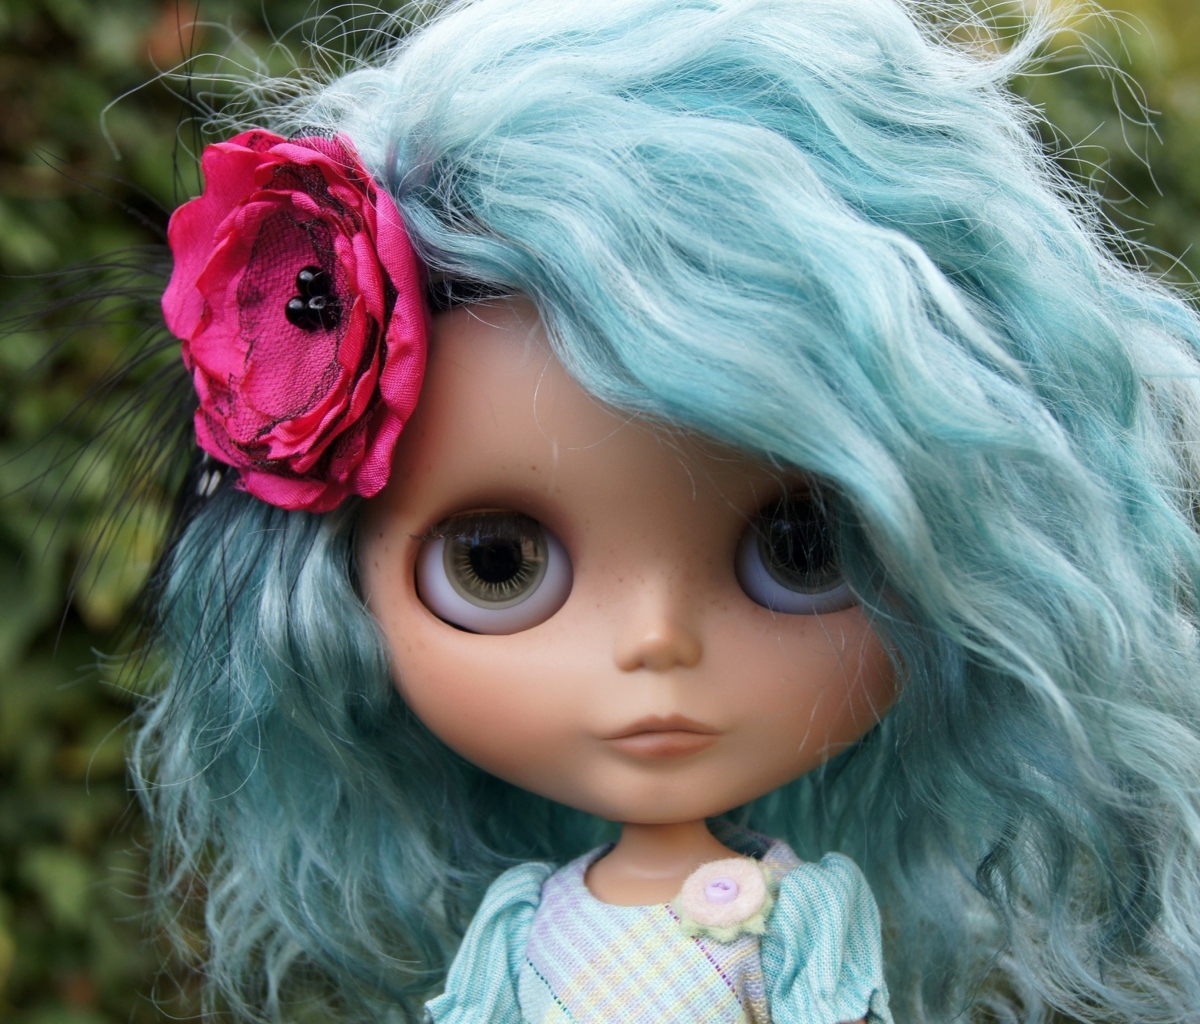 Doll With Blue Hair wallpaper 1200x1024